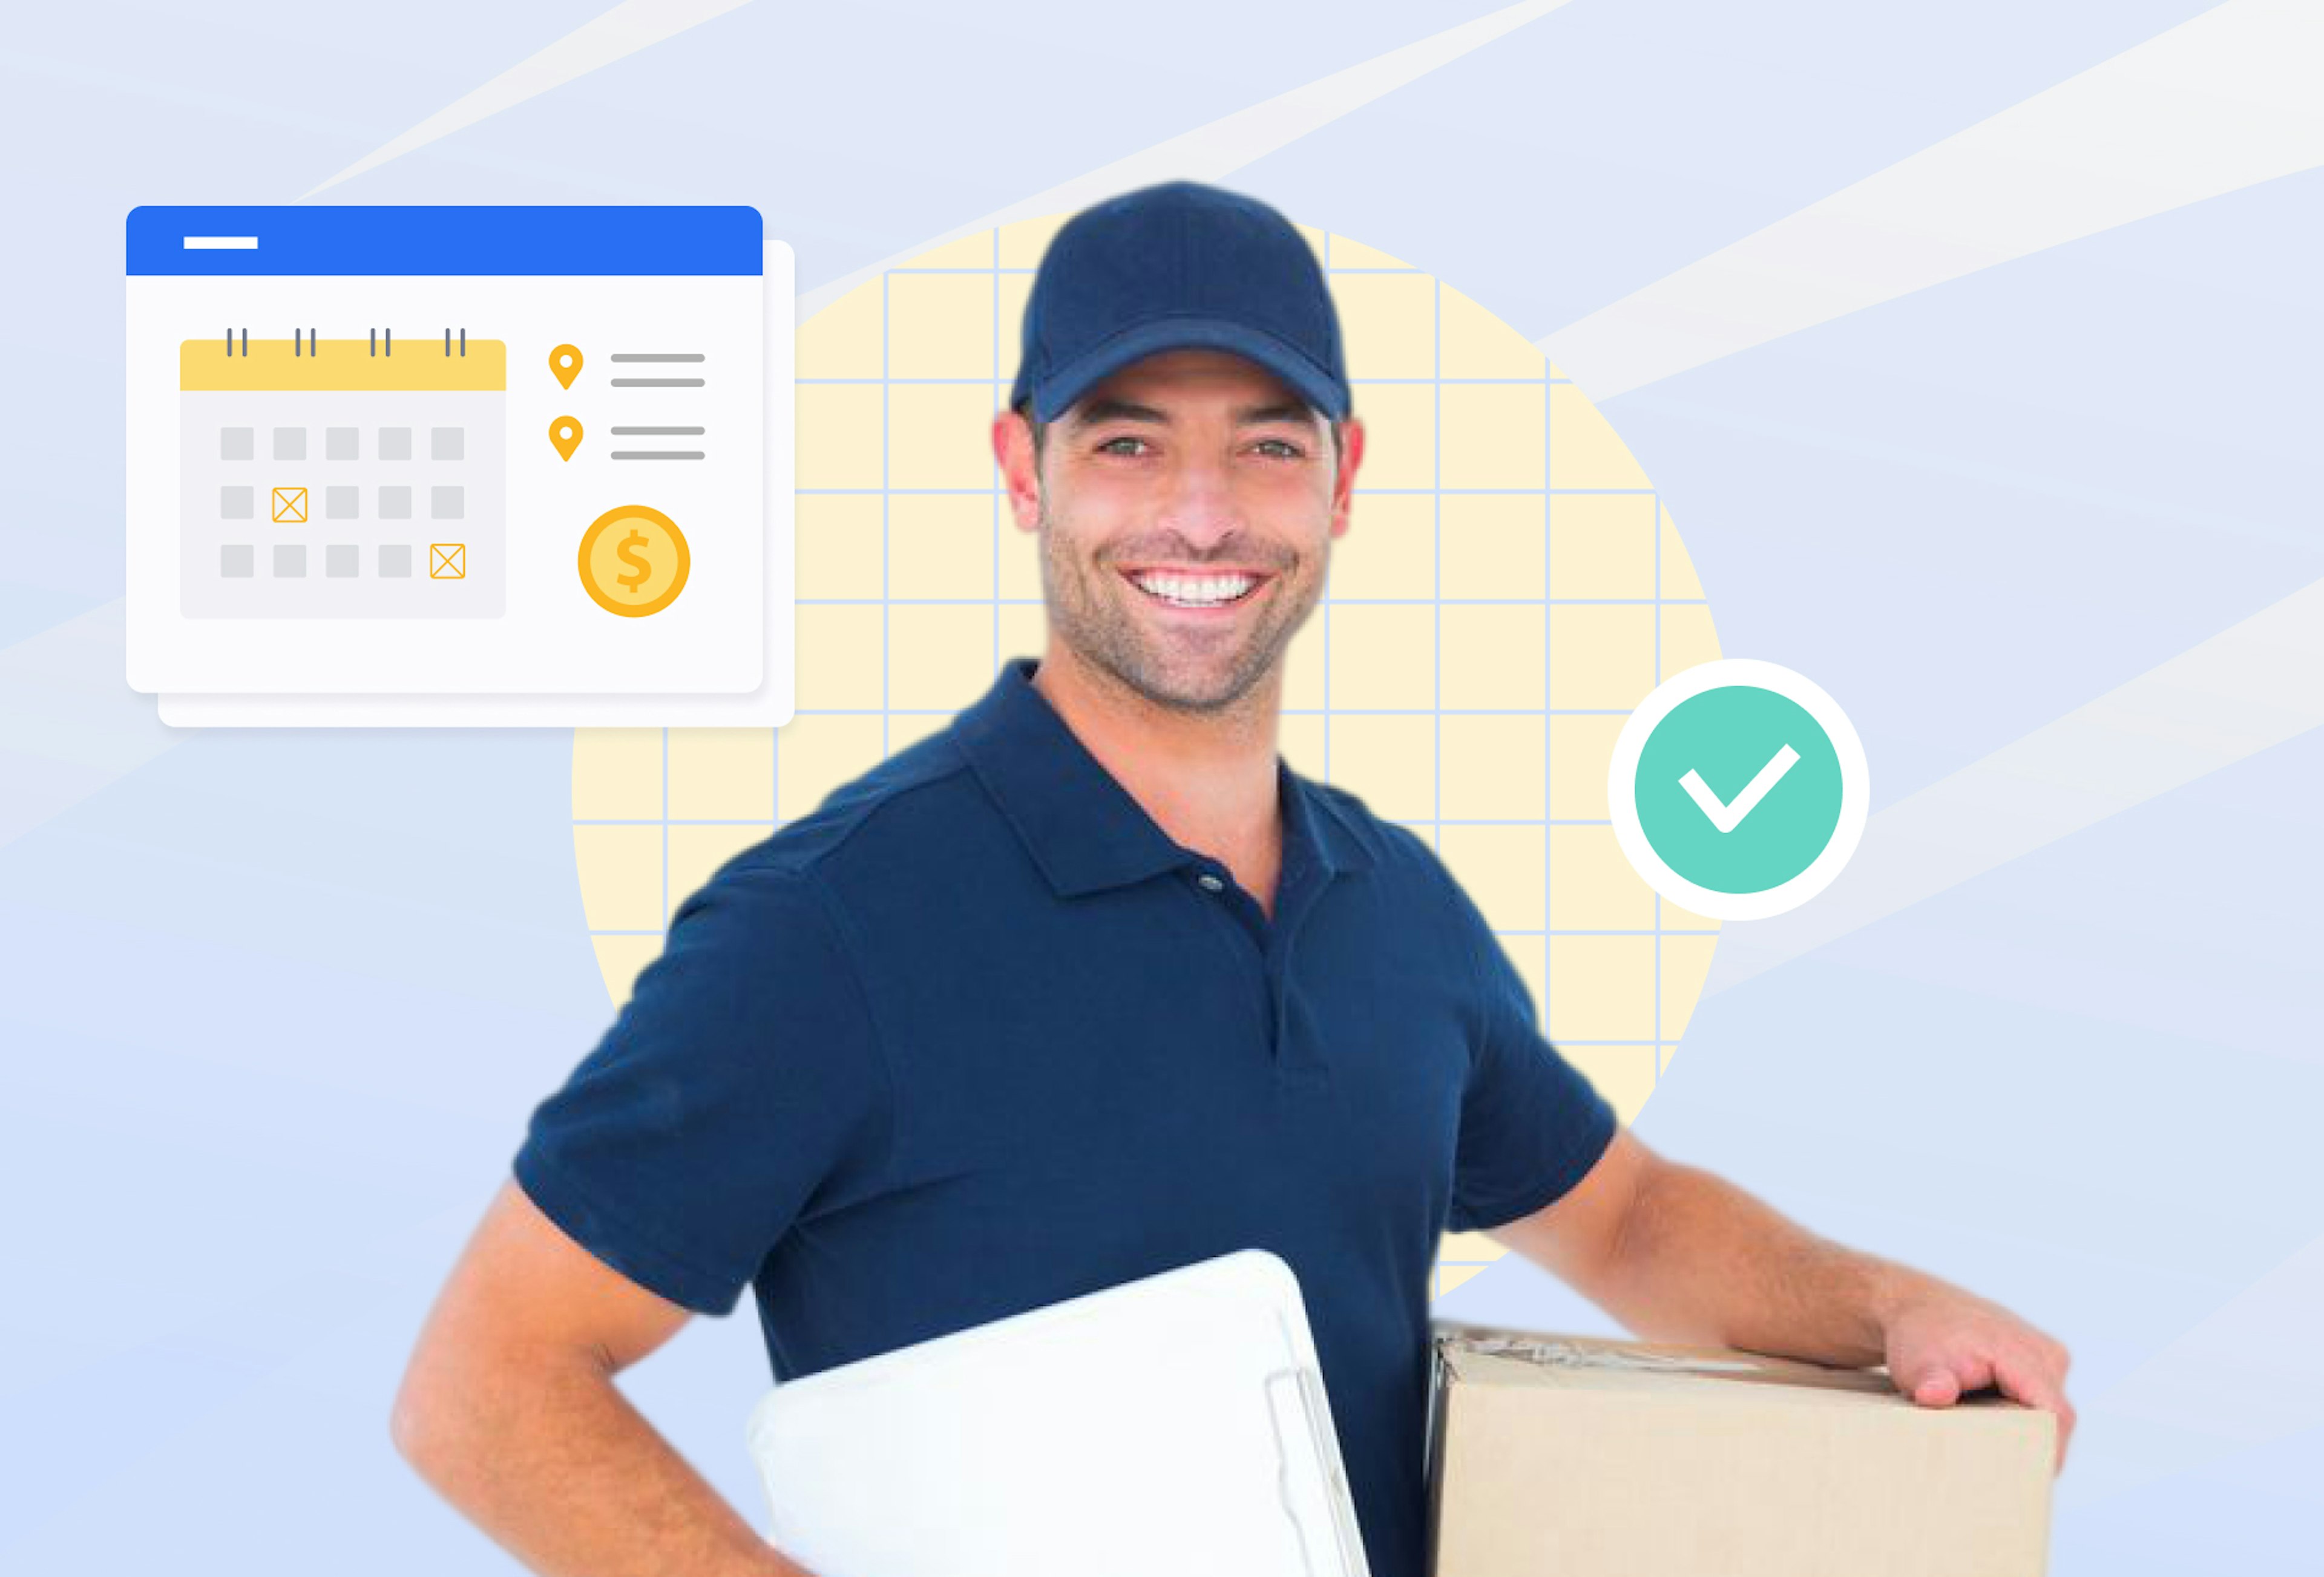 Mid-body shot of a delivery driver in a blue t-shirt and cap carrying a document and a cardboard box. To his left is a calendar with no date shown.